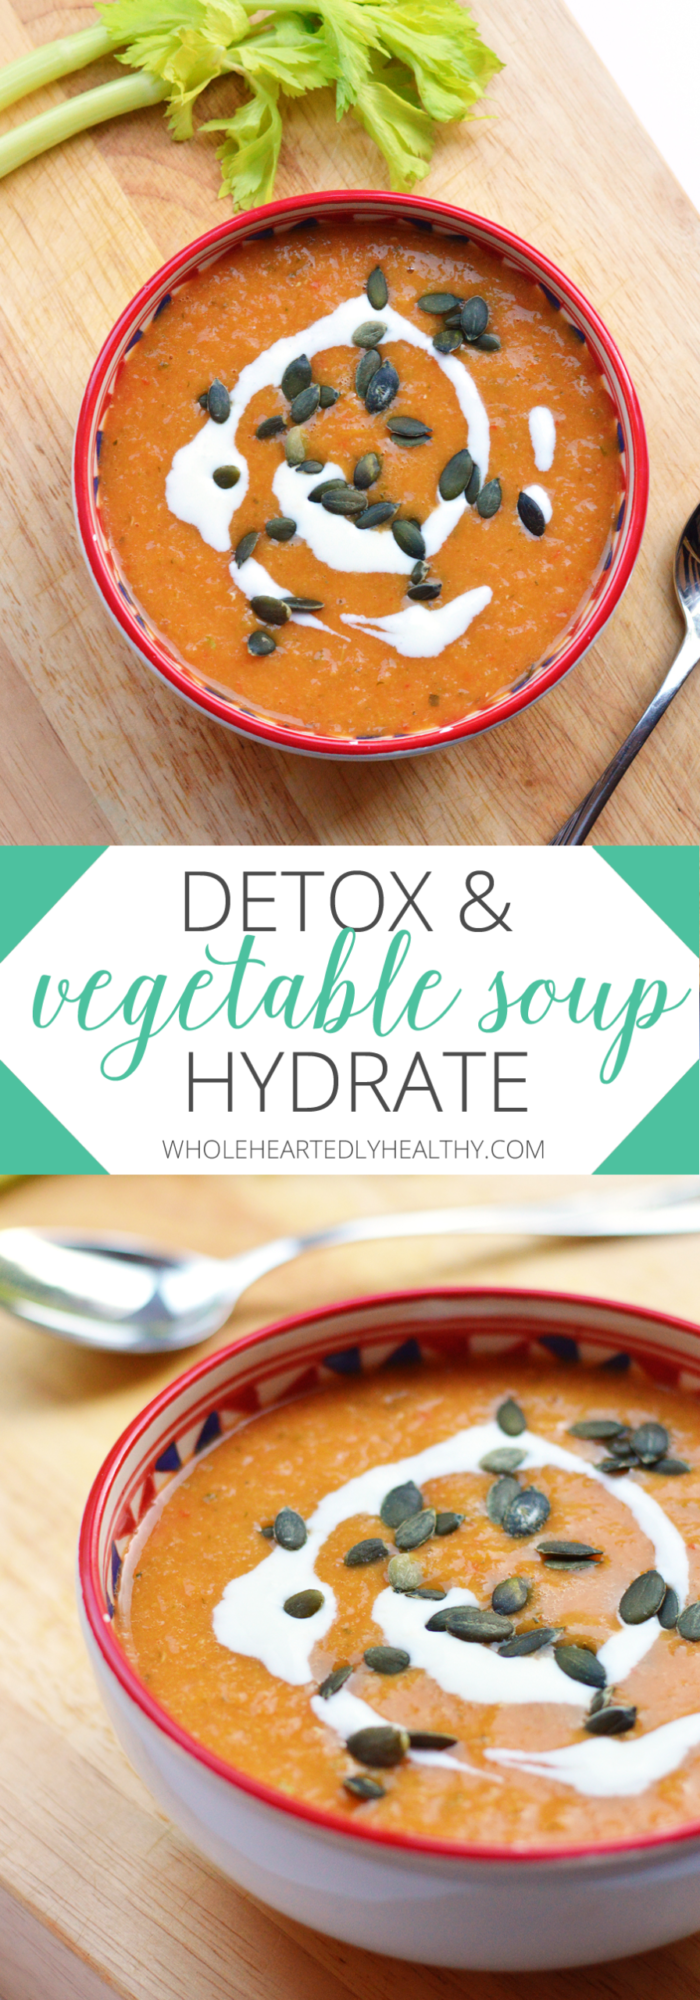 detox and hydrate vegetable soup recipe